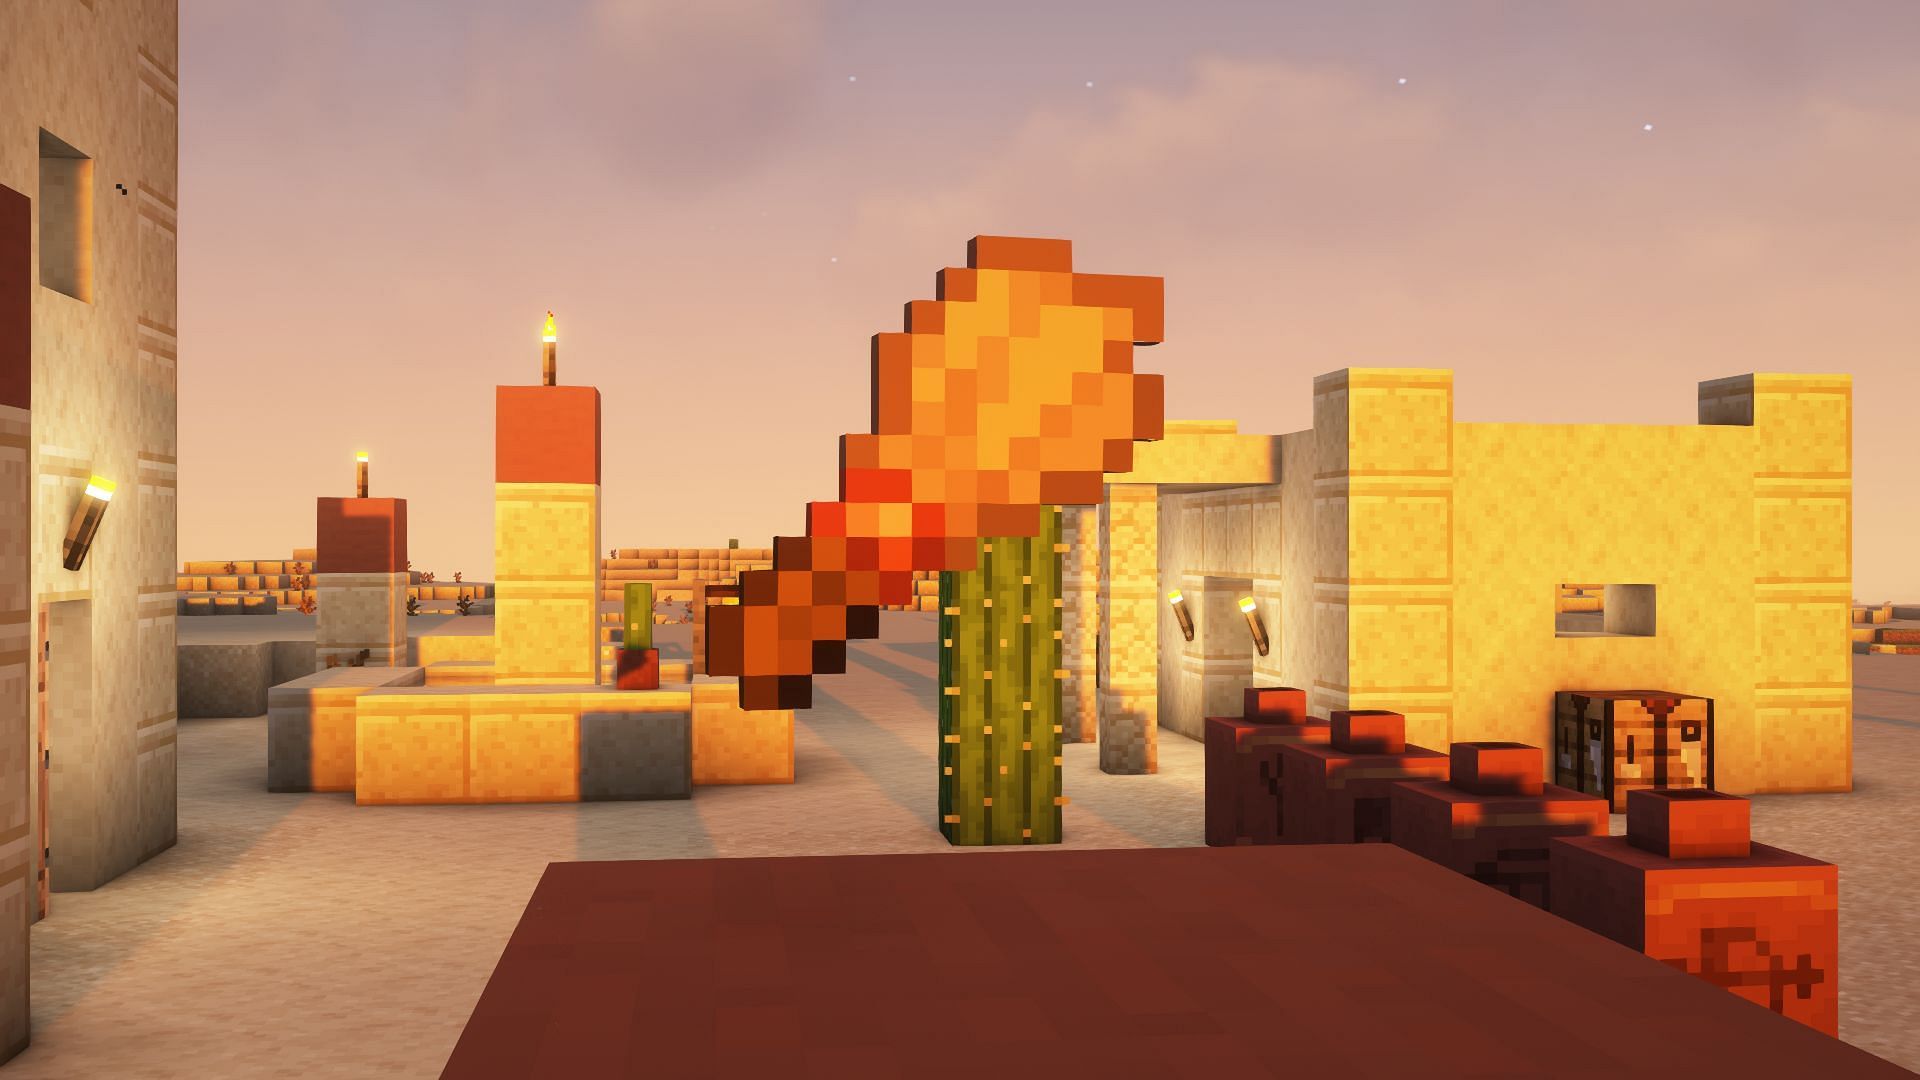 A brush in the game (Image via Mojang)